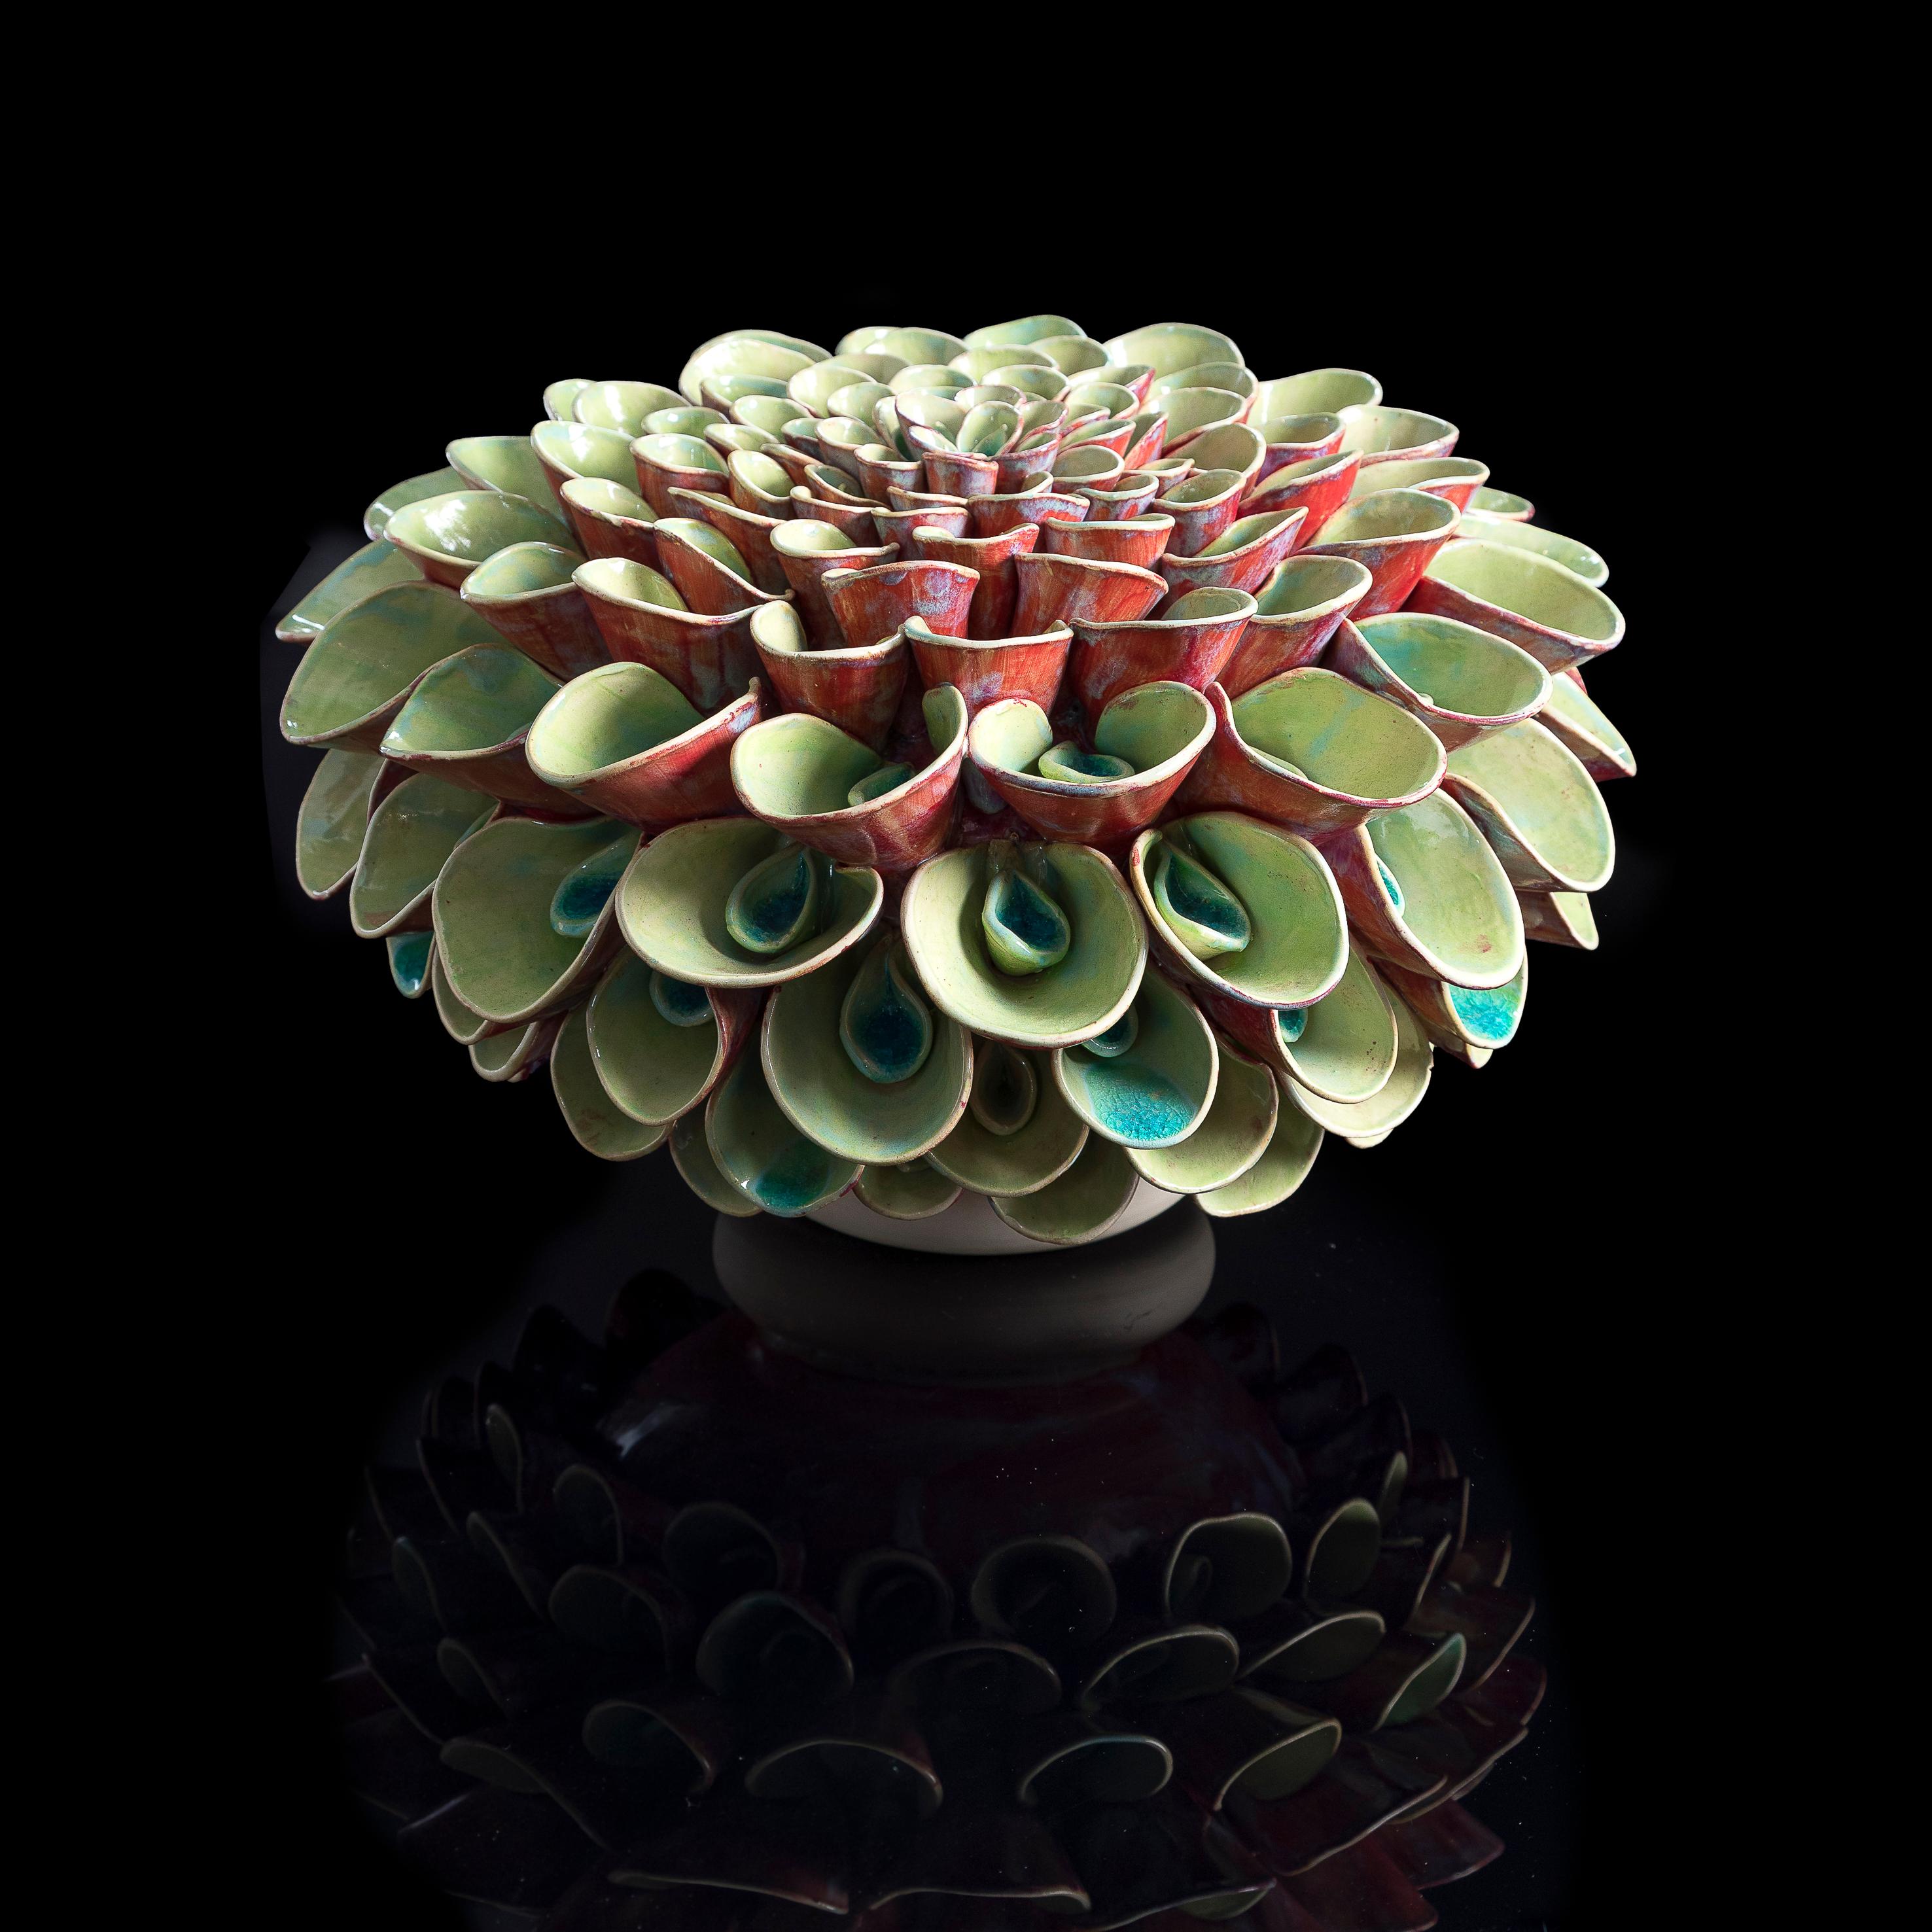 Frances Doherty Still-Life Sculpture - Lime and Cherry Pompom -  inspired by flowers and plants around us, red, green